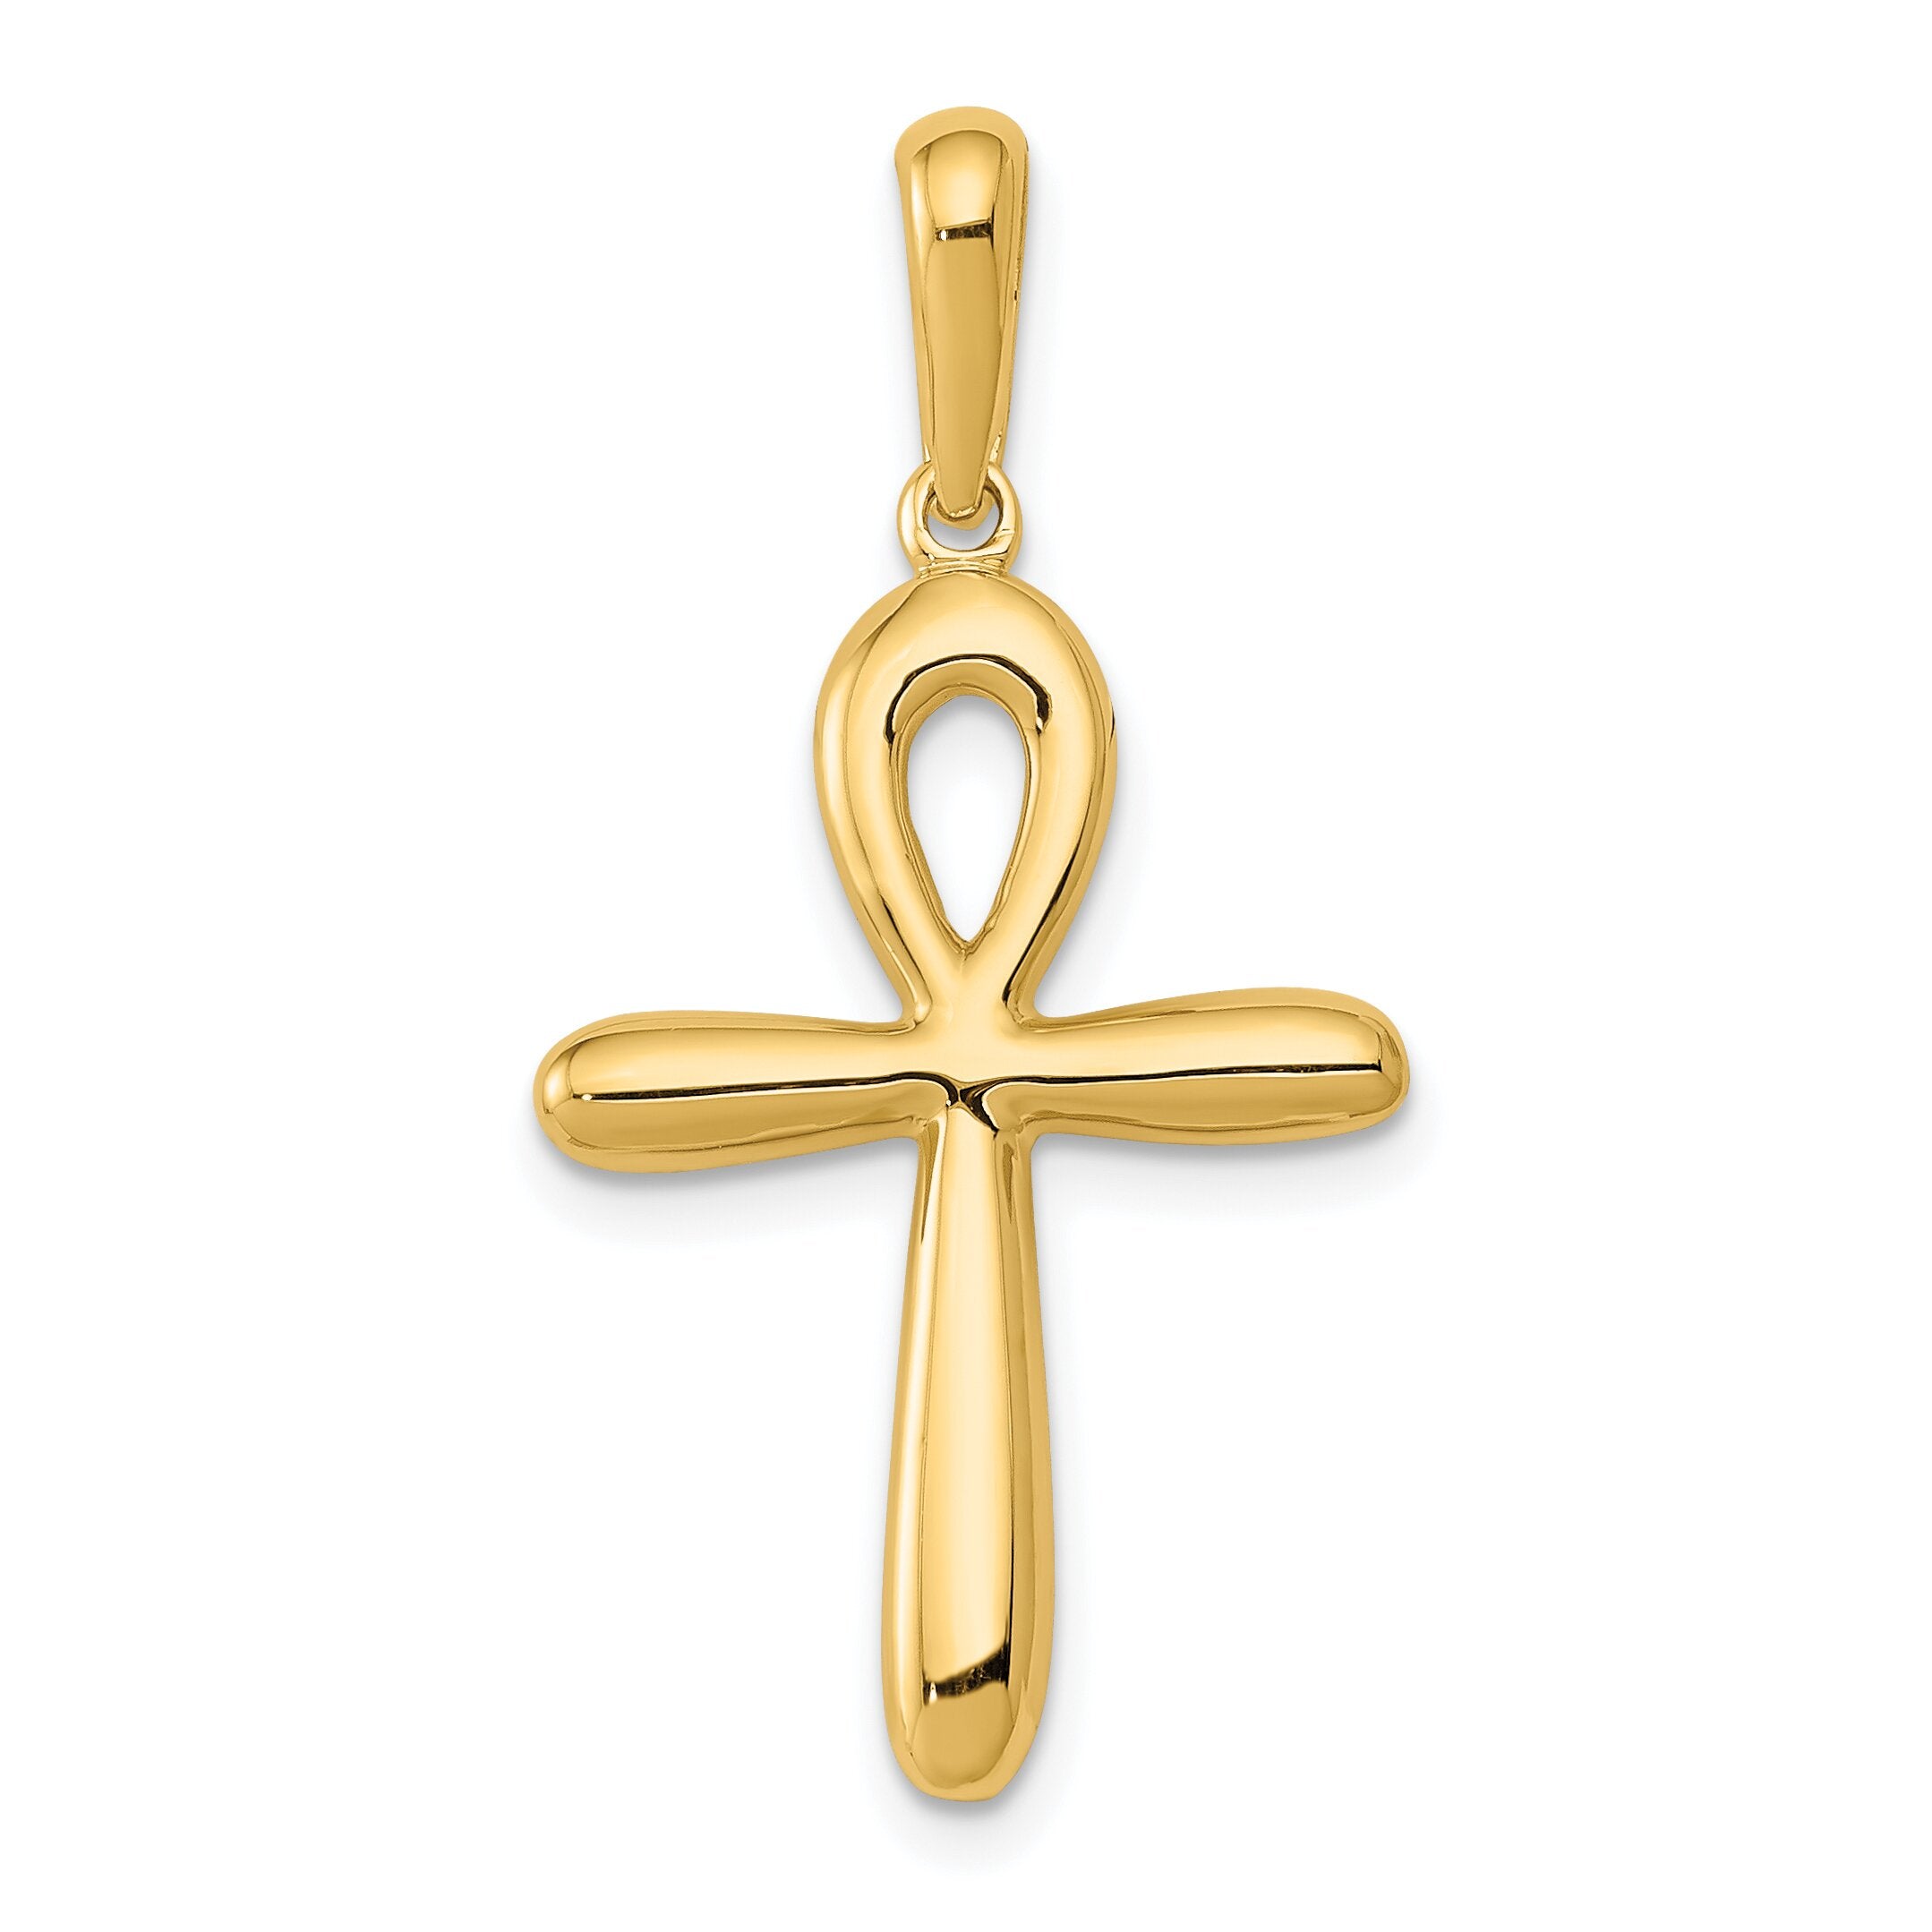 Amazon.com: 18K Gold Plated Original Key To Life Ankh Cross Pendant Necklace  unisex /80% Pure Copper Extracted from  Sinai/HandMade/Rustproof/Adjustable/Symbol of Protection/Egyptian Jewelry  Gift for Women/Men. : Handmade Products